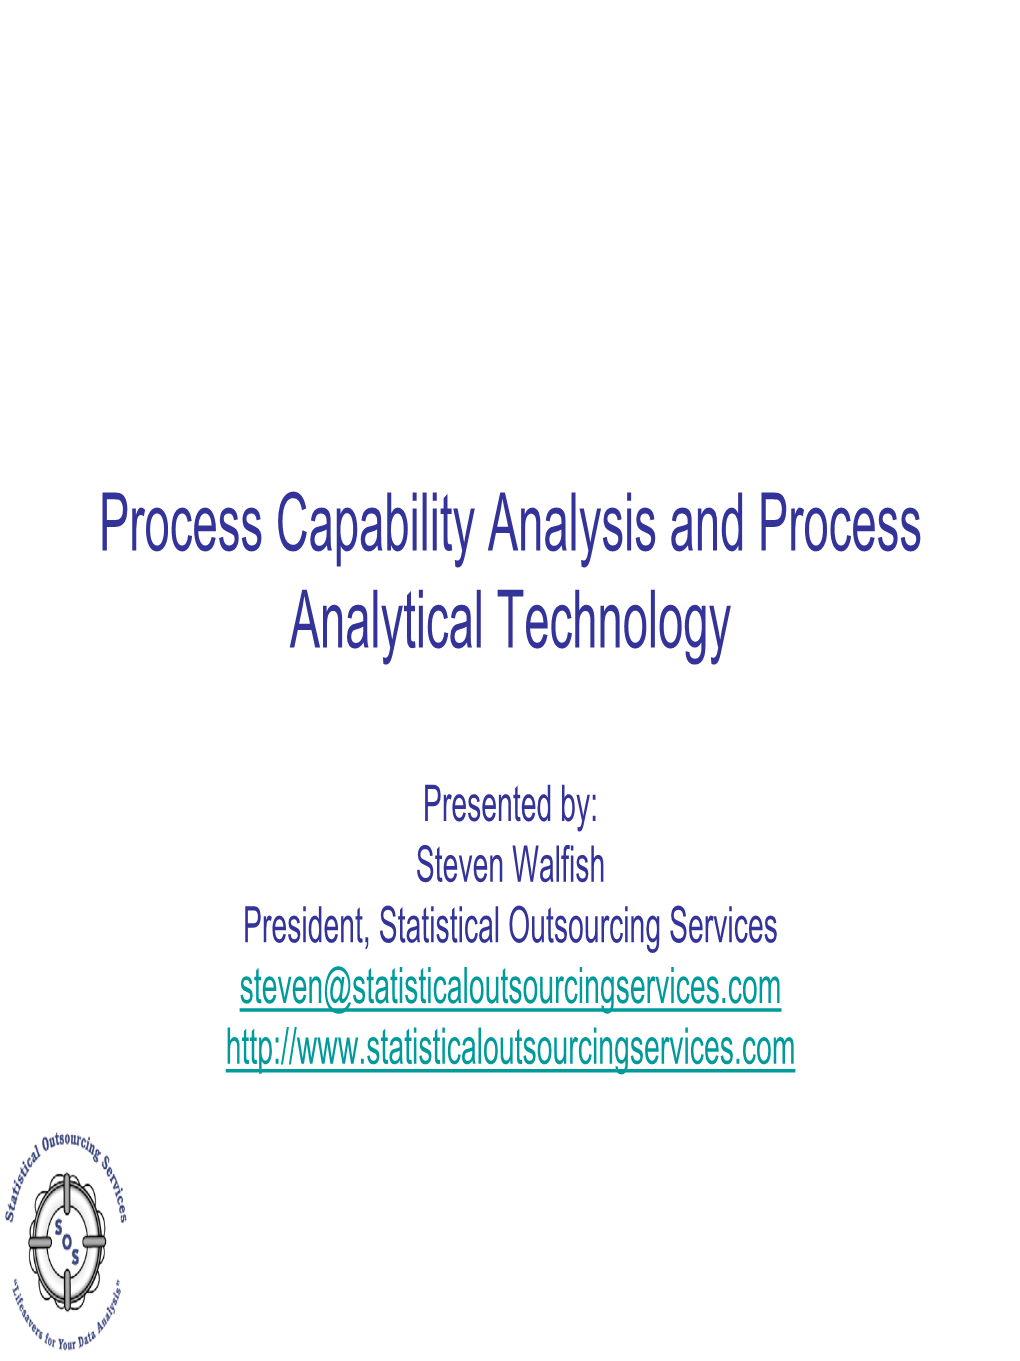 Process Capability Analysis and Process Analytical Technology